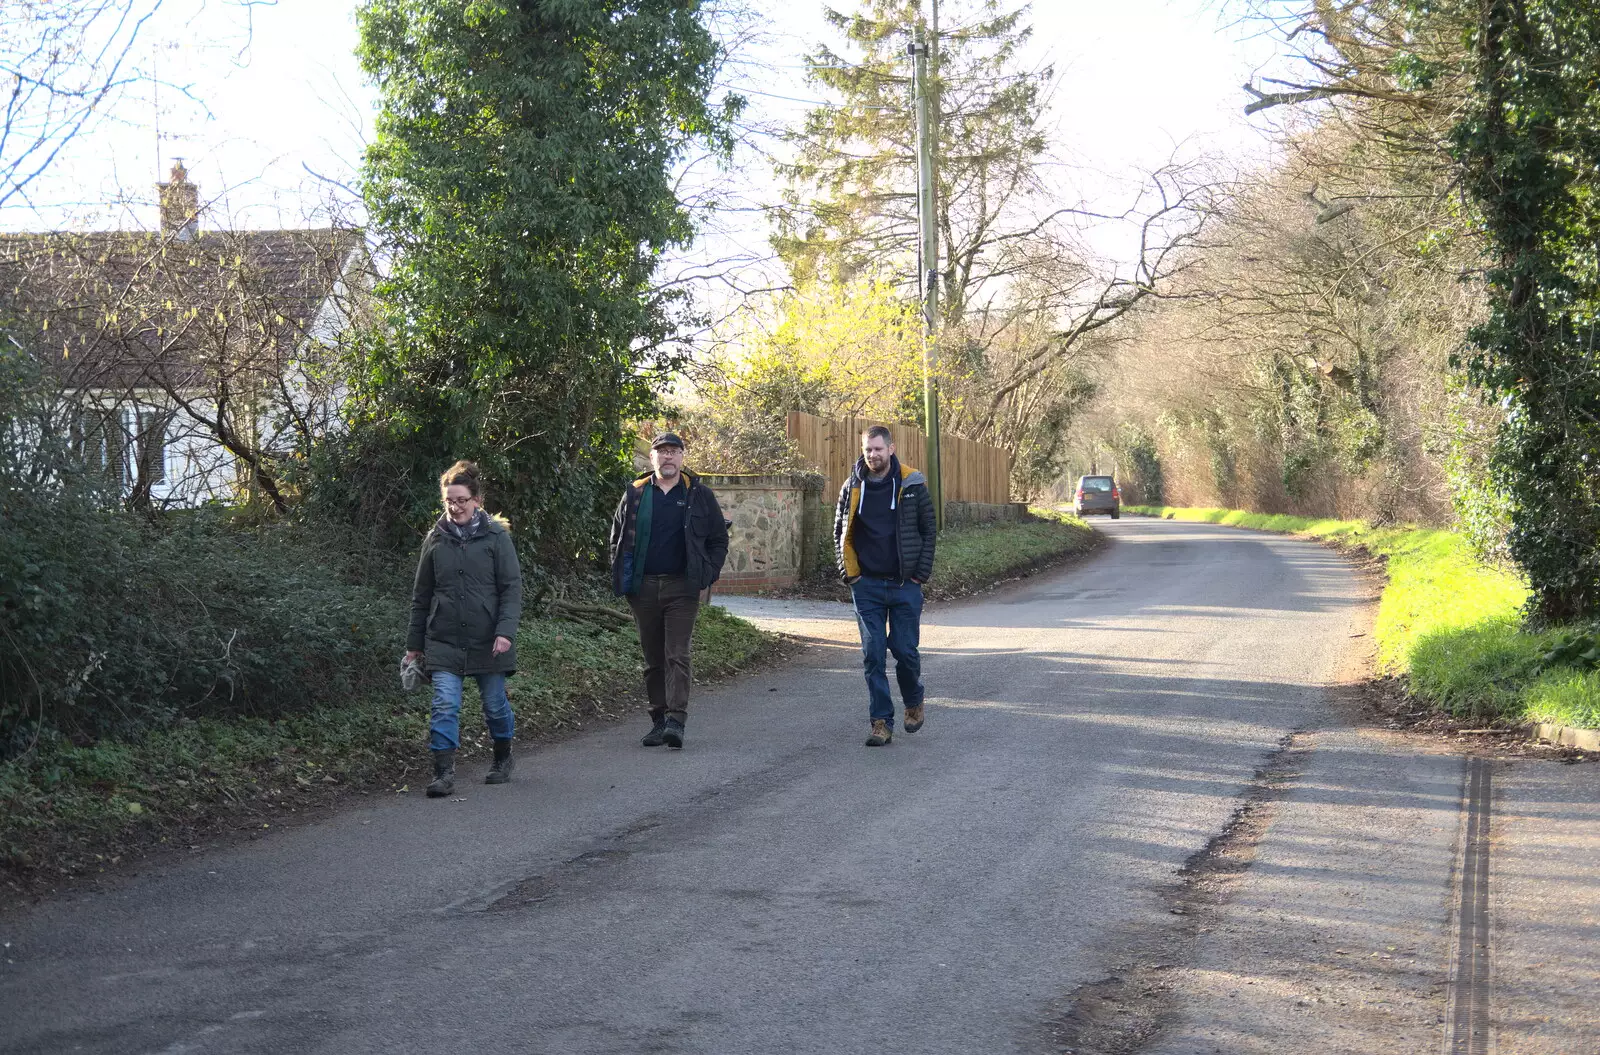 Suey, Marc and The Boy Phil head up the road, from Another Walk to The Swan, Hoxne, Suffolk - 5th February 2023